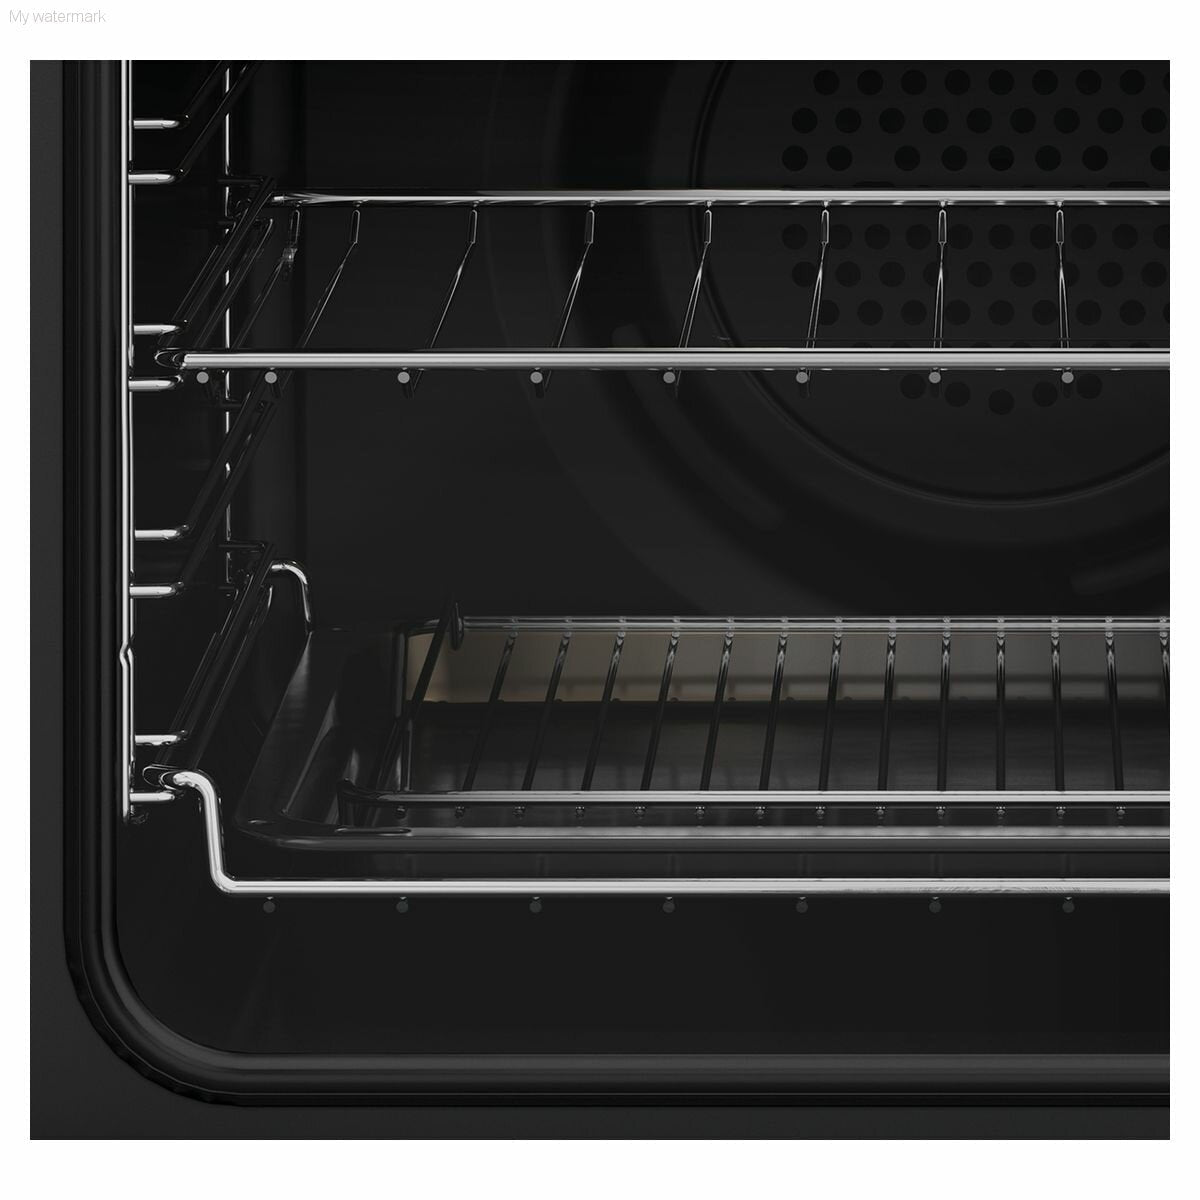 Westinghouse 60cm Built-in Electric Oven